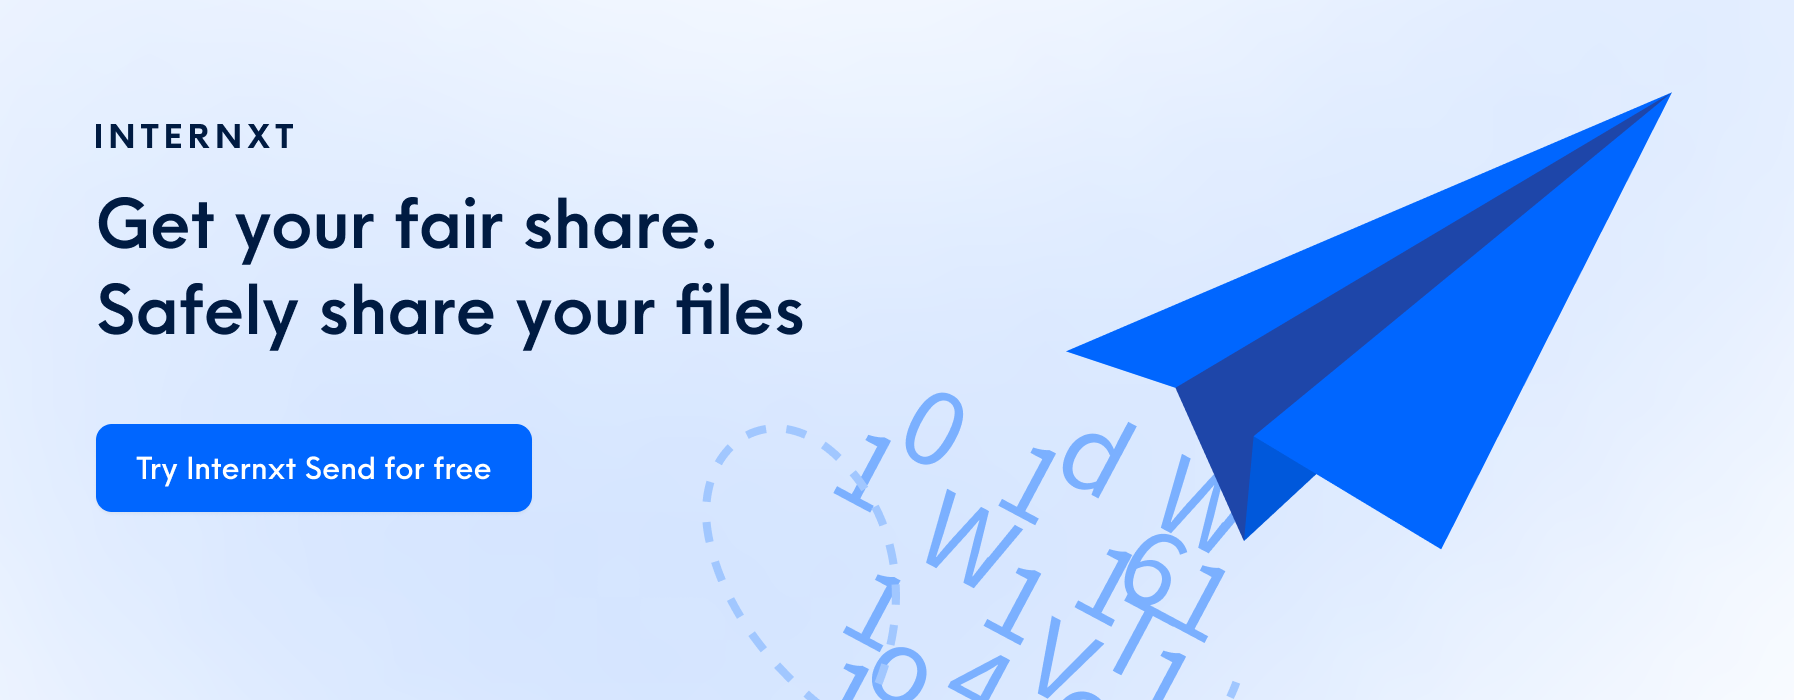 Internxt Send allows you to send large files for free